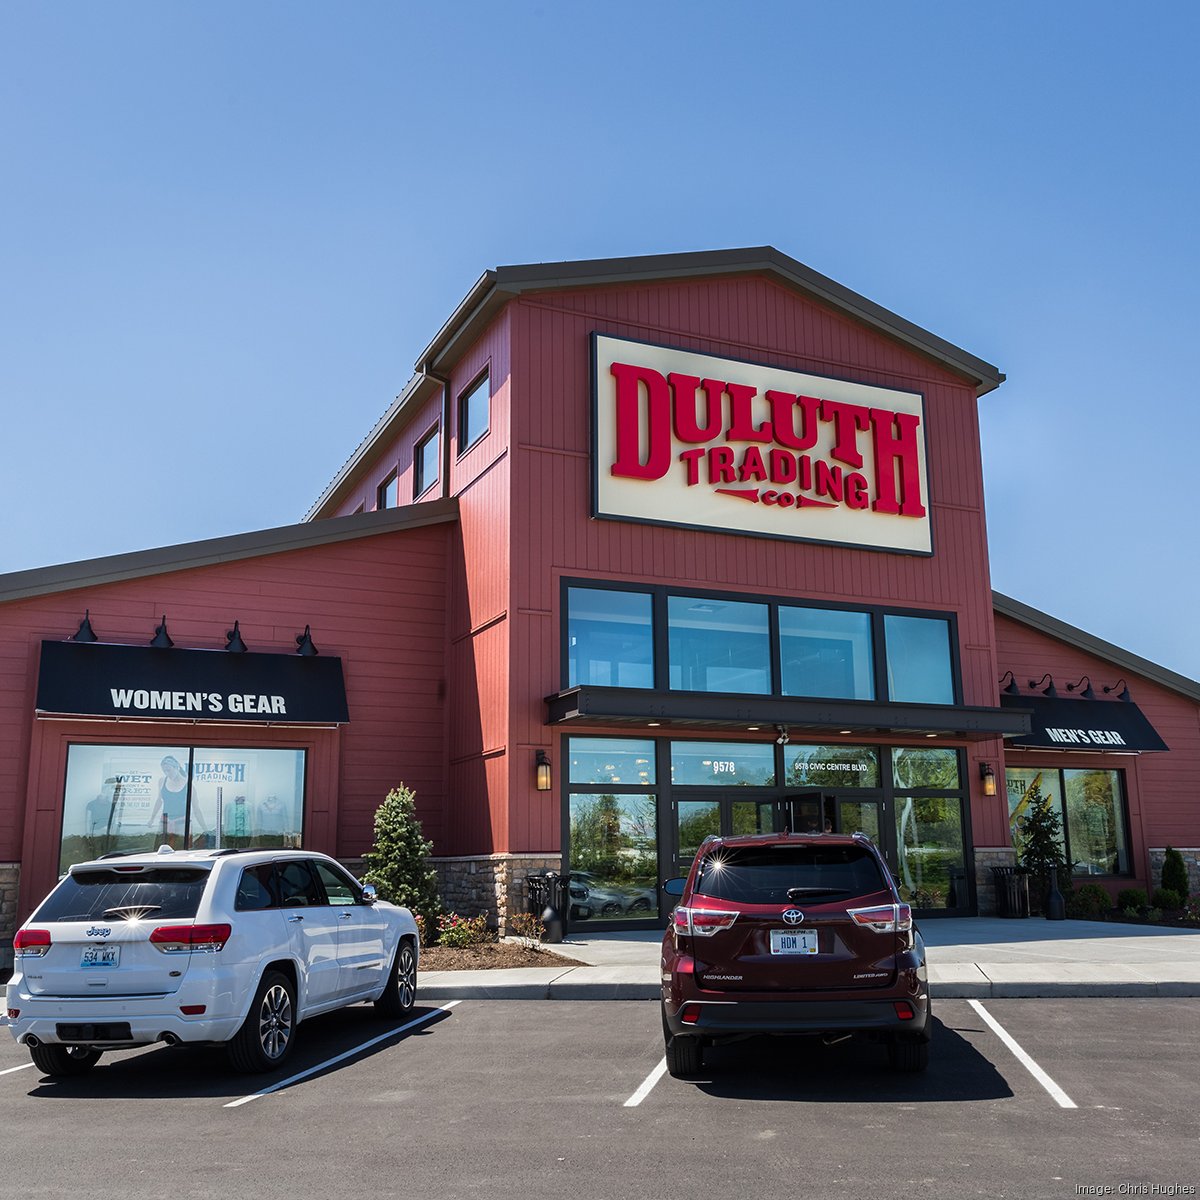 Duluth Trading Co. to host first-ever underwear 'trade-up' event